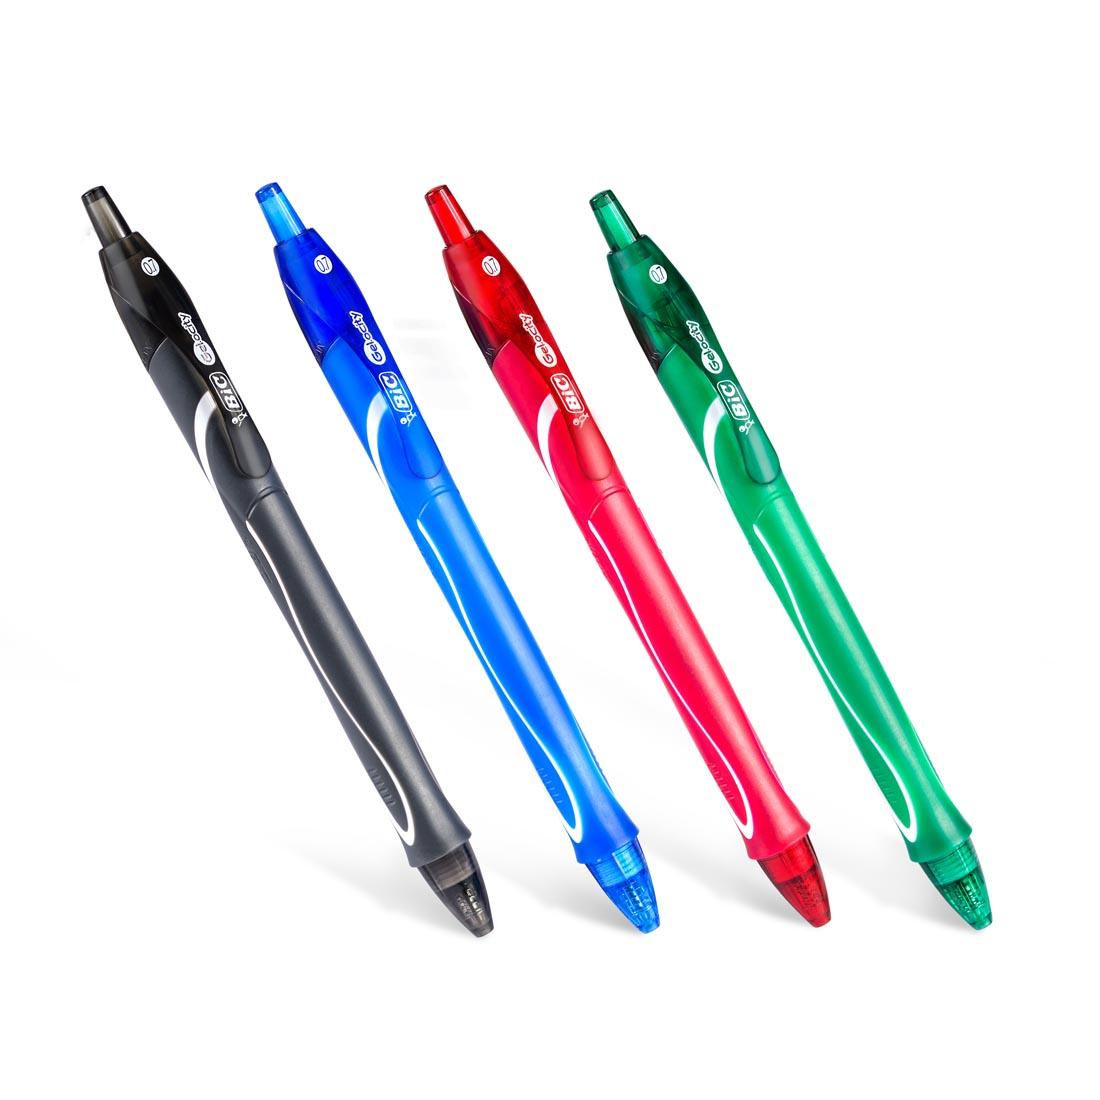 Bic Gel-Ocity Assorted Gel Pens 4-Count Set, featuring black, blue, red and green